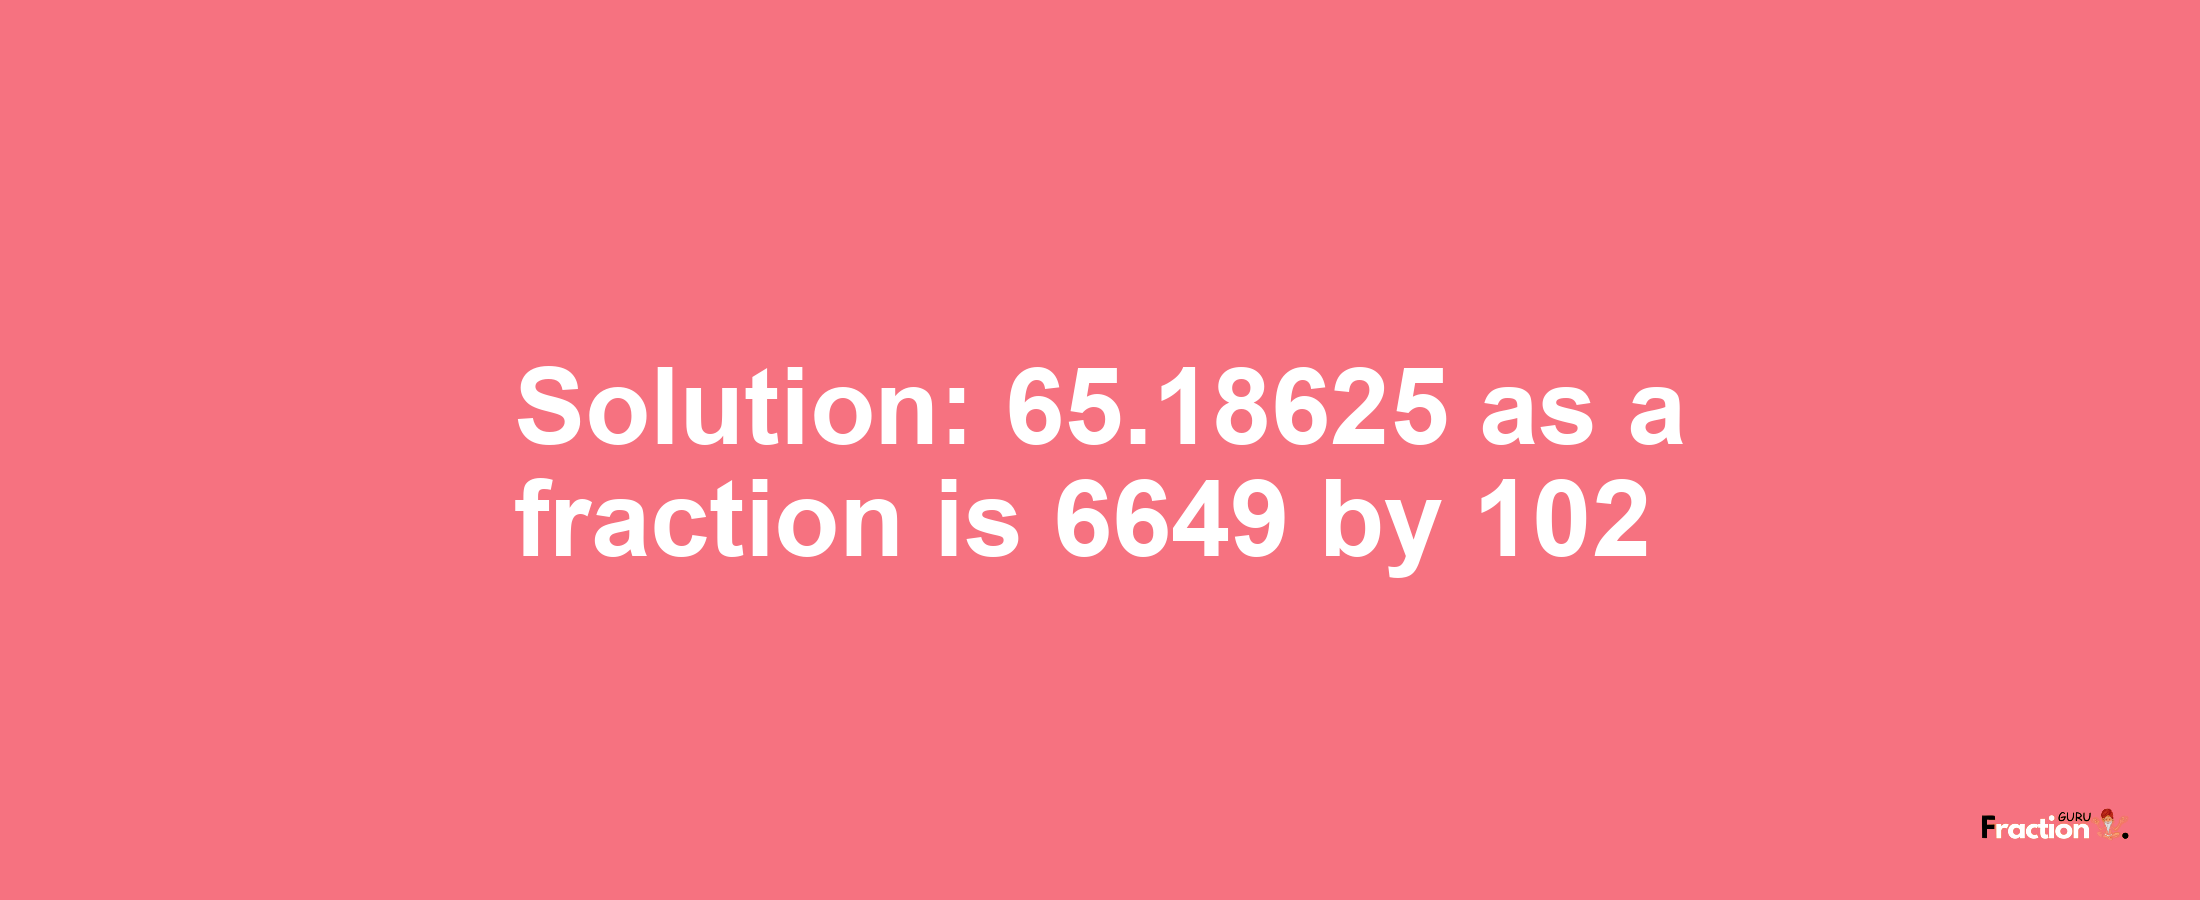 Solution:65.18625 as a fraction is 6649/102